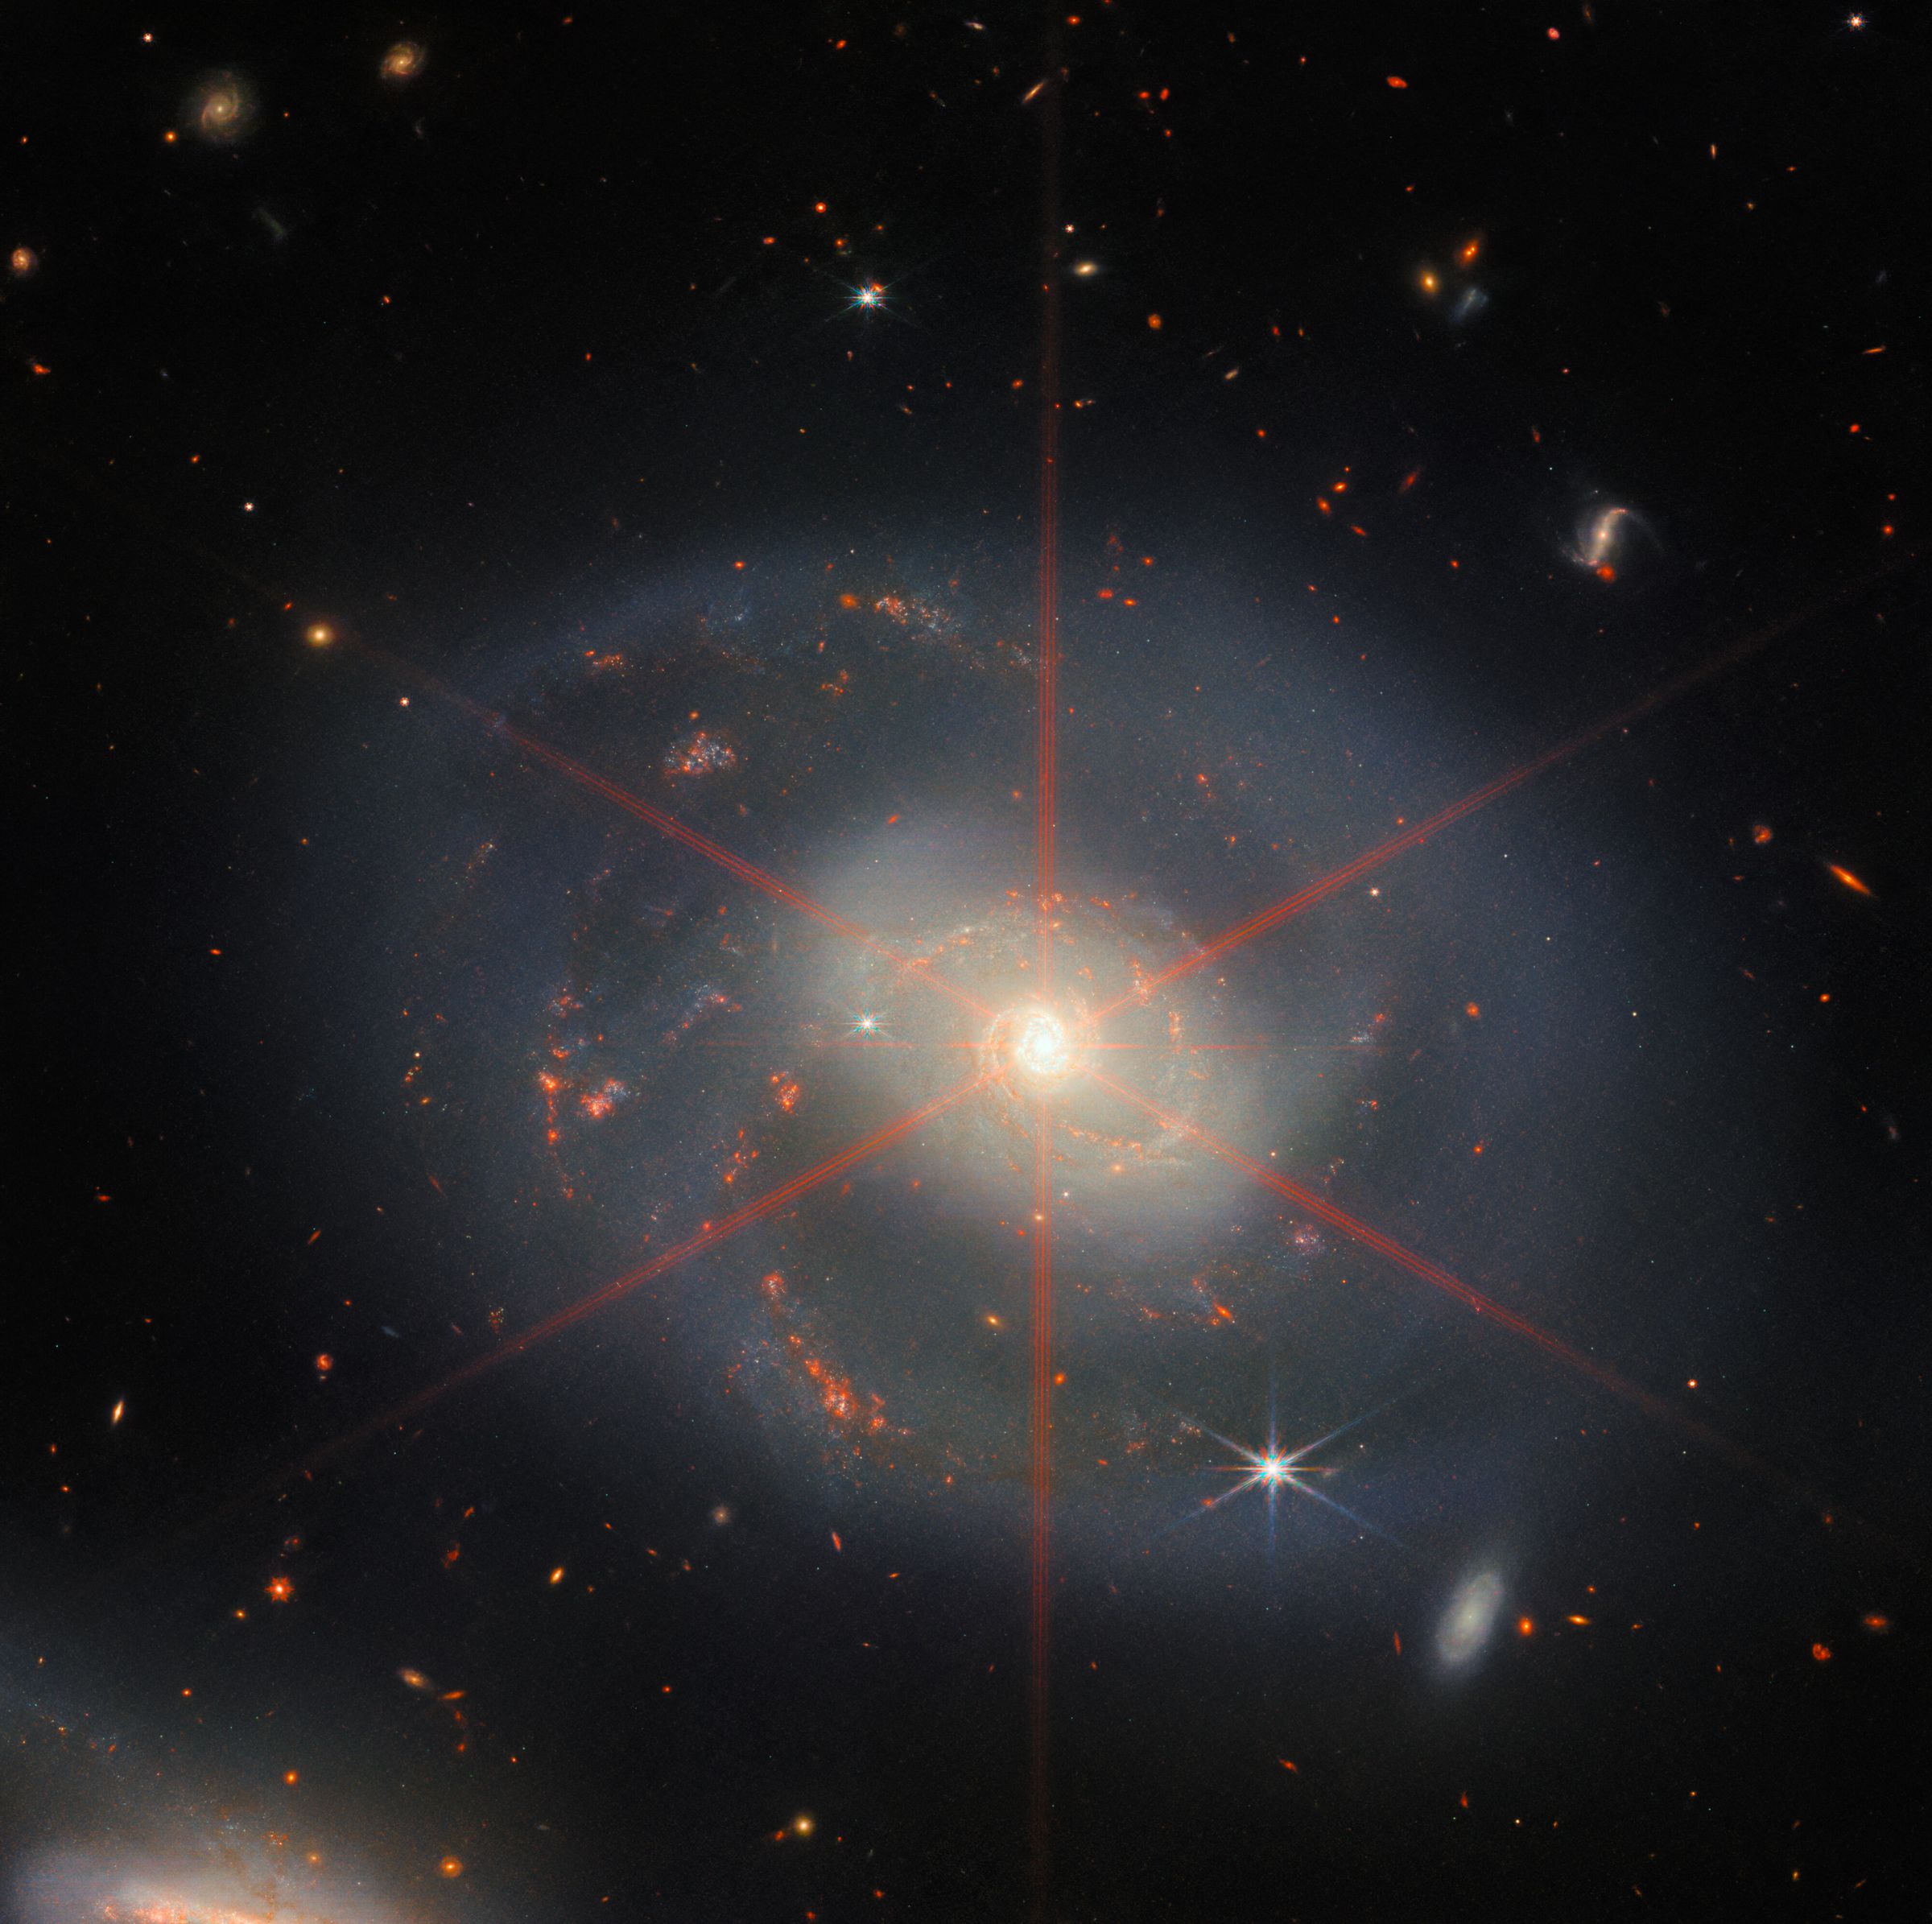 This image shows a spiral galaxy that is dominated by a bright central region. The galaxy has blue-purple hues with orange-red regions filled with stars. Also visible is large diffraction spike, which appears as a star pattern over the central region of the galaxy. Lots of stars and galaxies fill the background scene